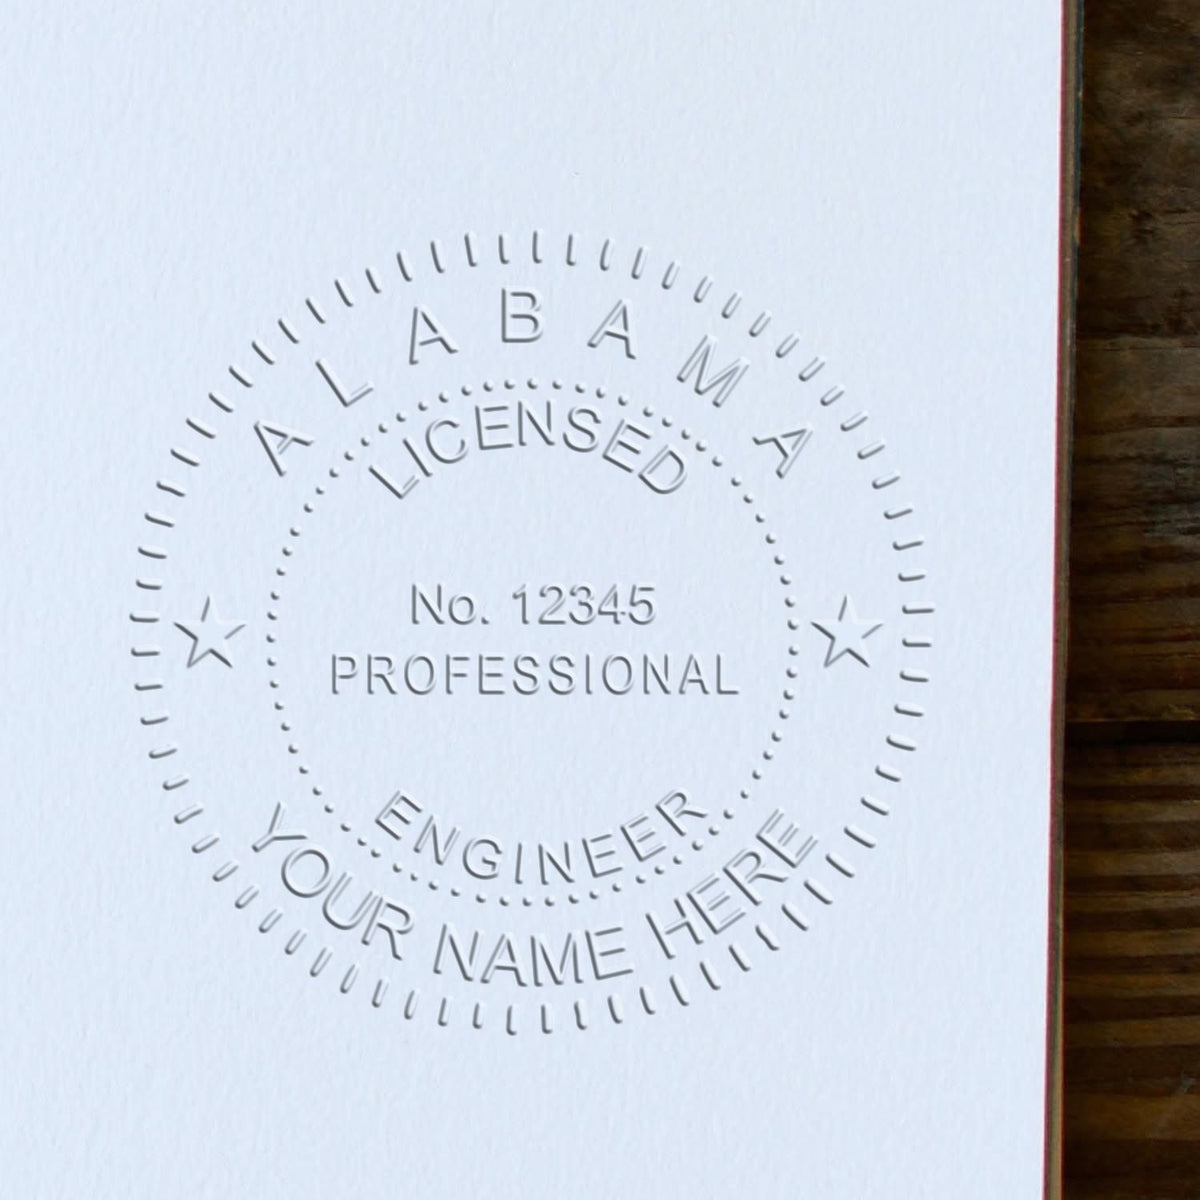 A photograph of the Hybrid Alabama Engineer Seal stamp impression reveals a vivid, professional image of the on paper.